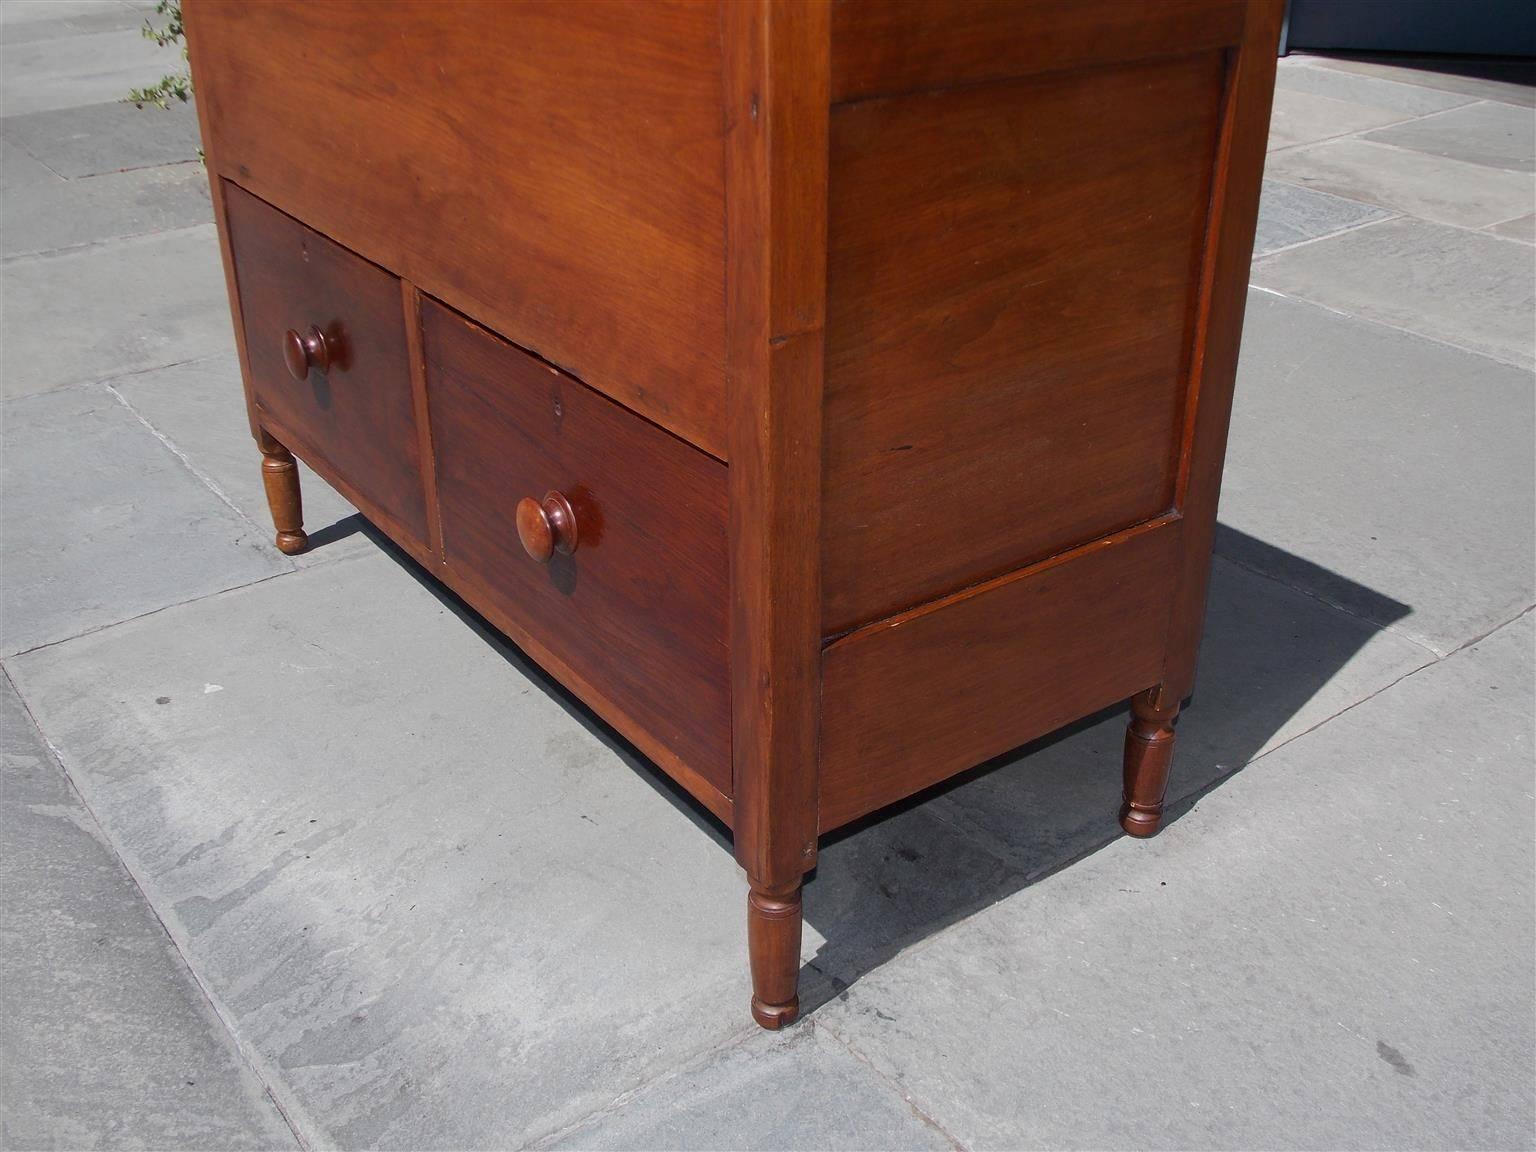 Hand-Carved American Walnut Hinged Top Compartmentalized Two Drawer Sugar Chest, Circa 1820